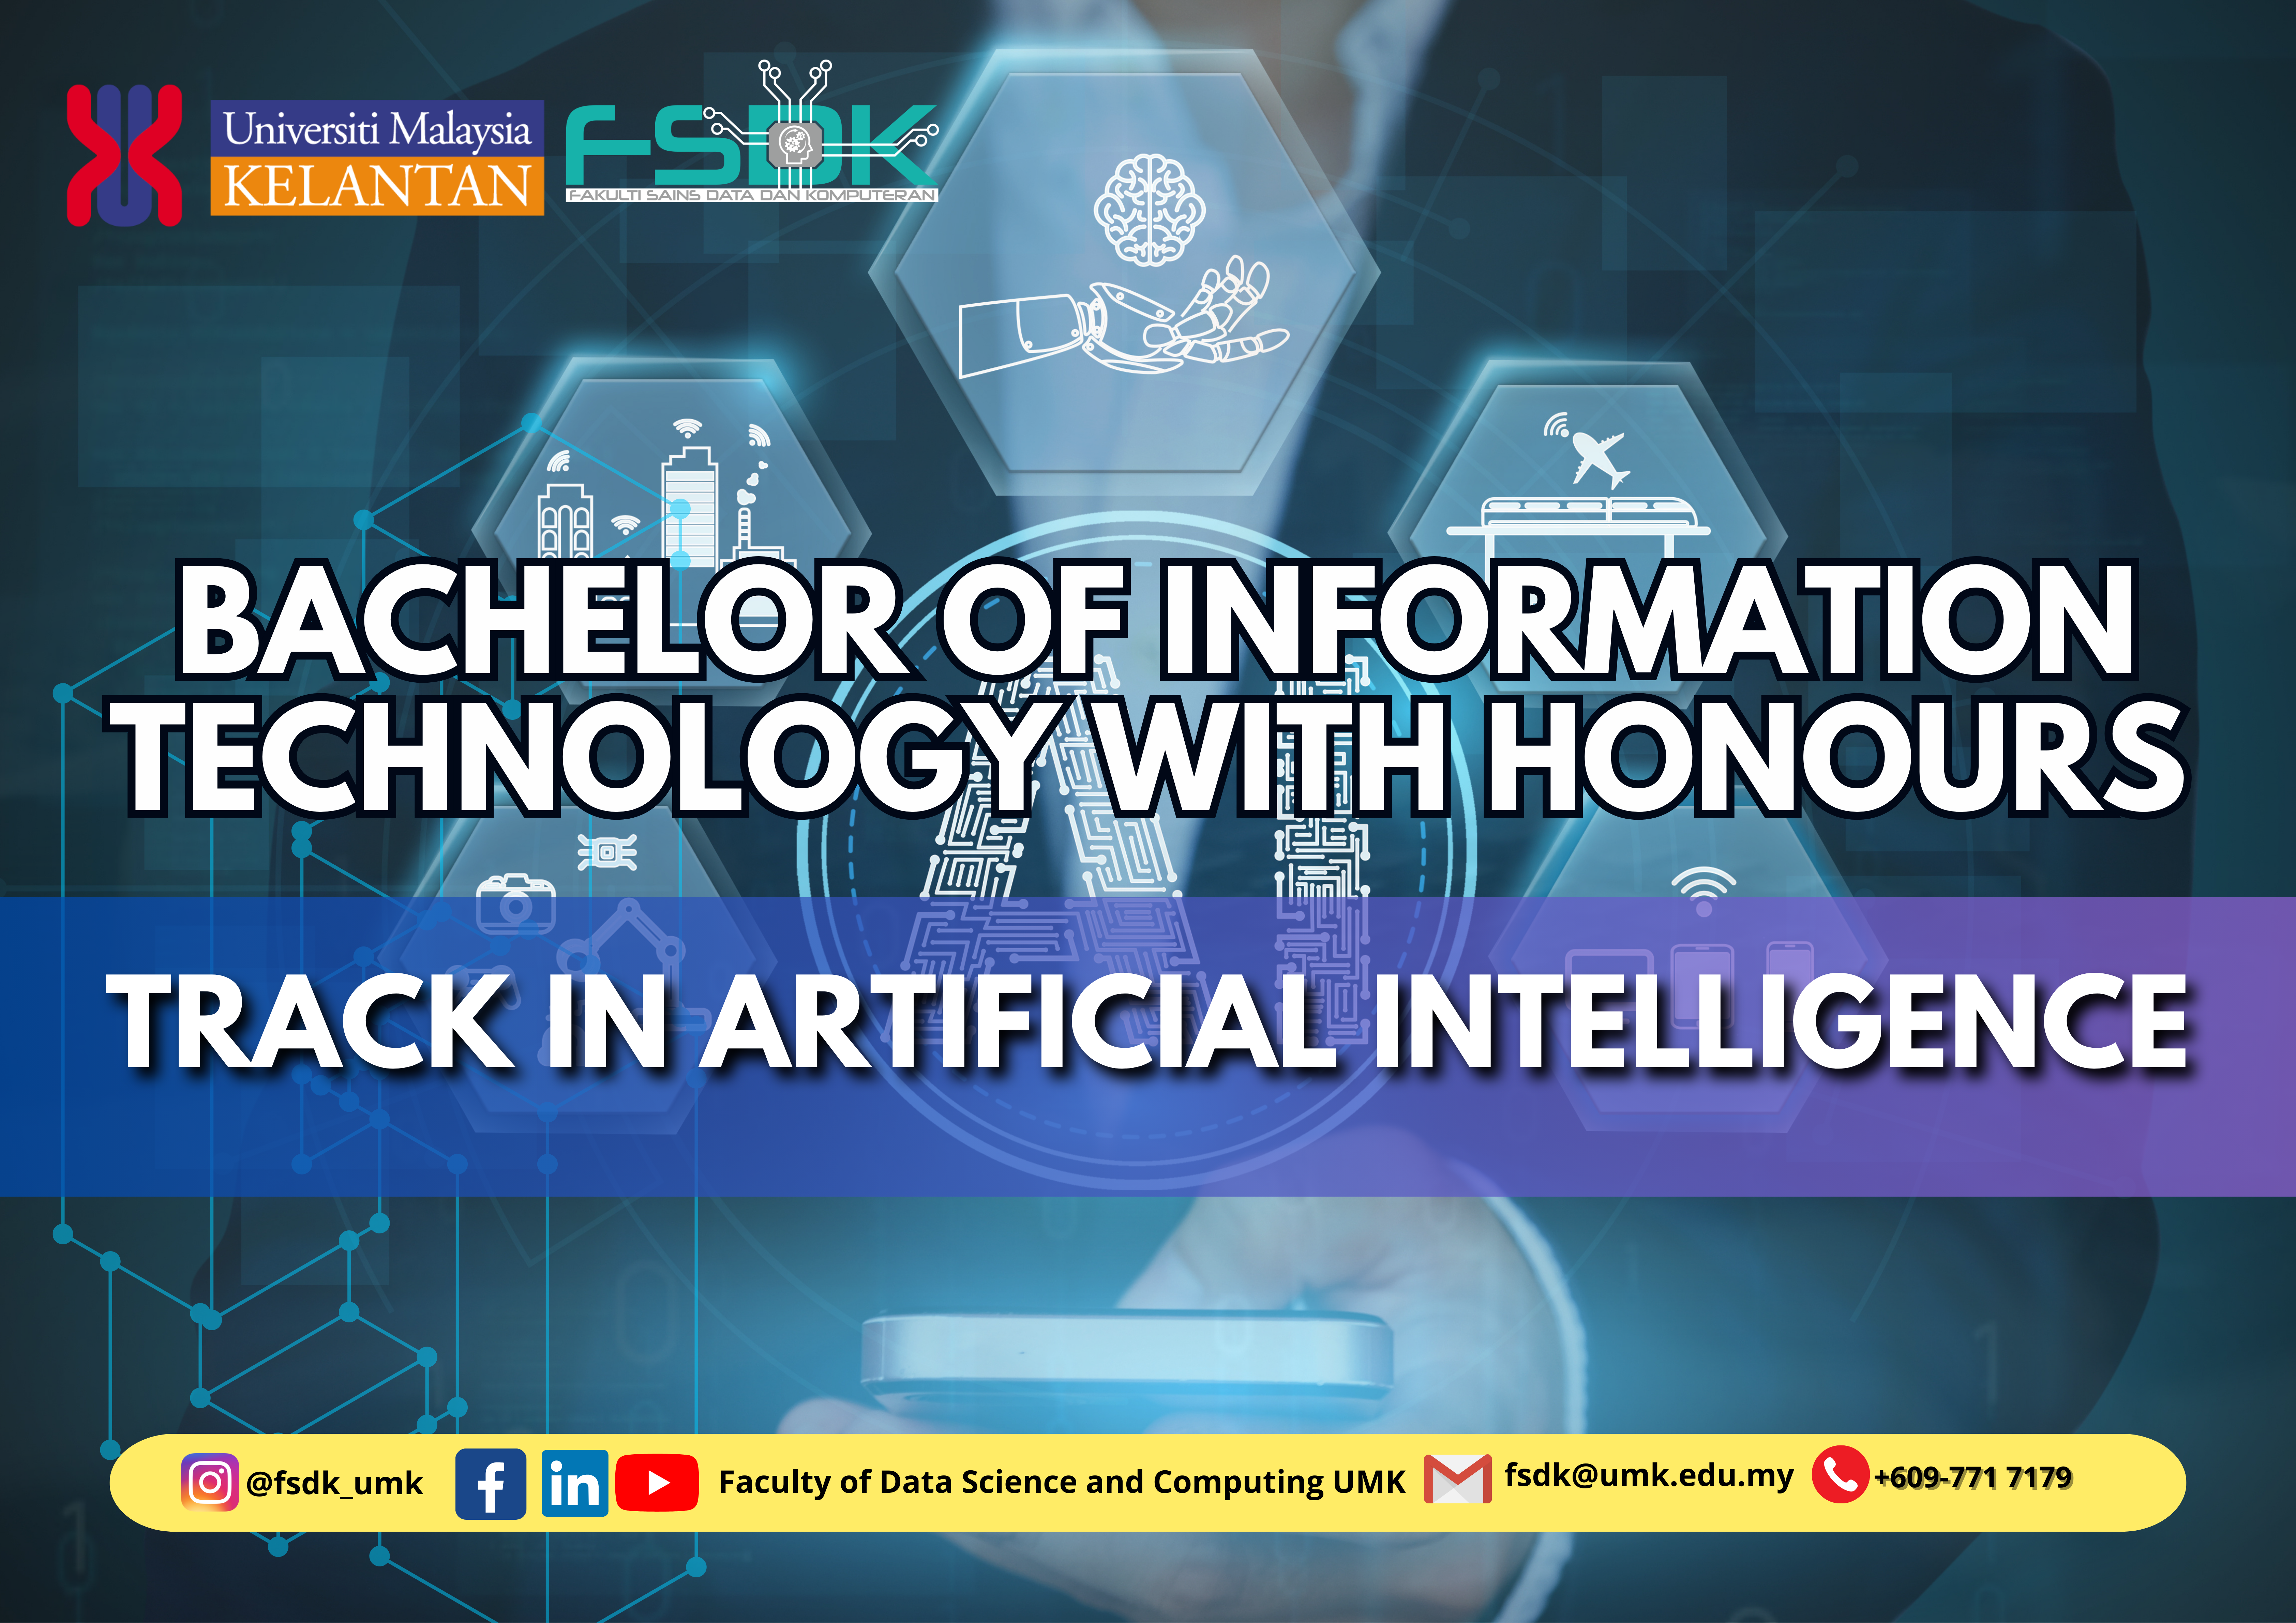 BACHELOR OF INFORMATION TECHNOLOGY WITH HONOUR (TRACK IN ARTIFICIAL INTELLIGENCE)